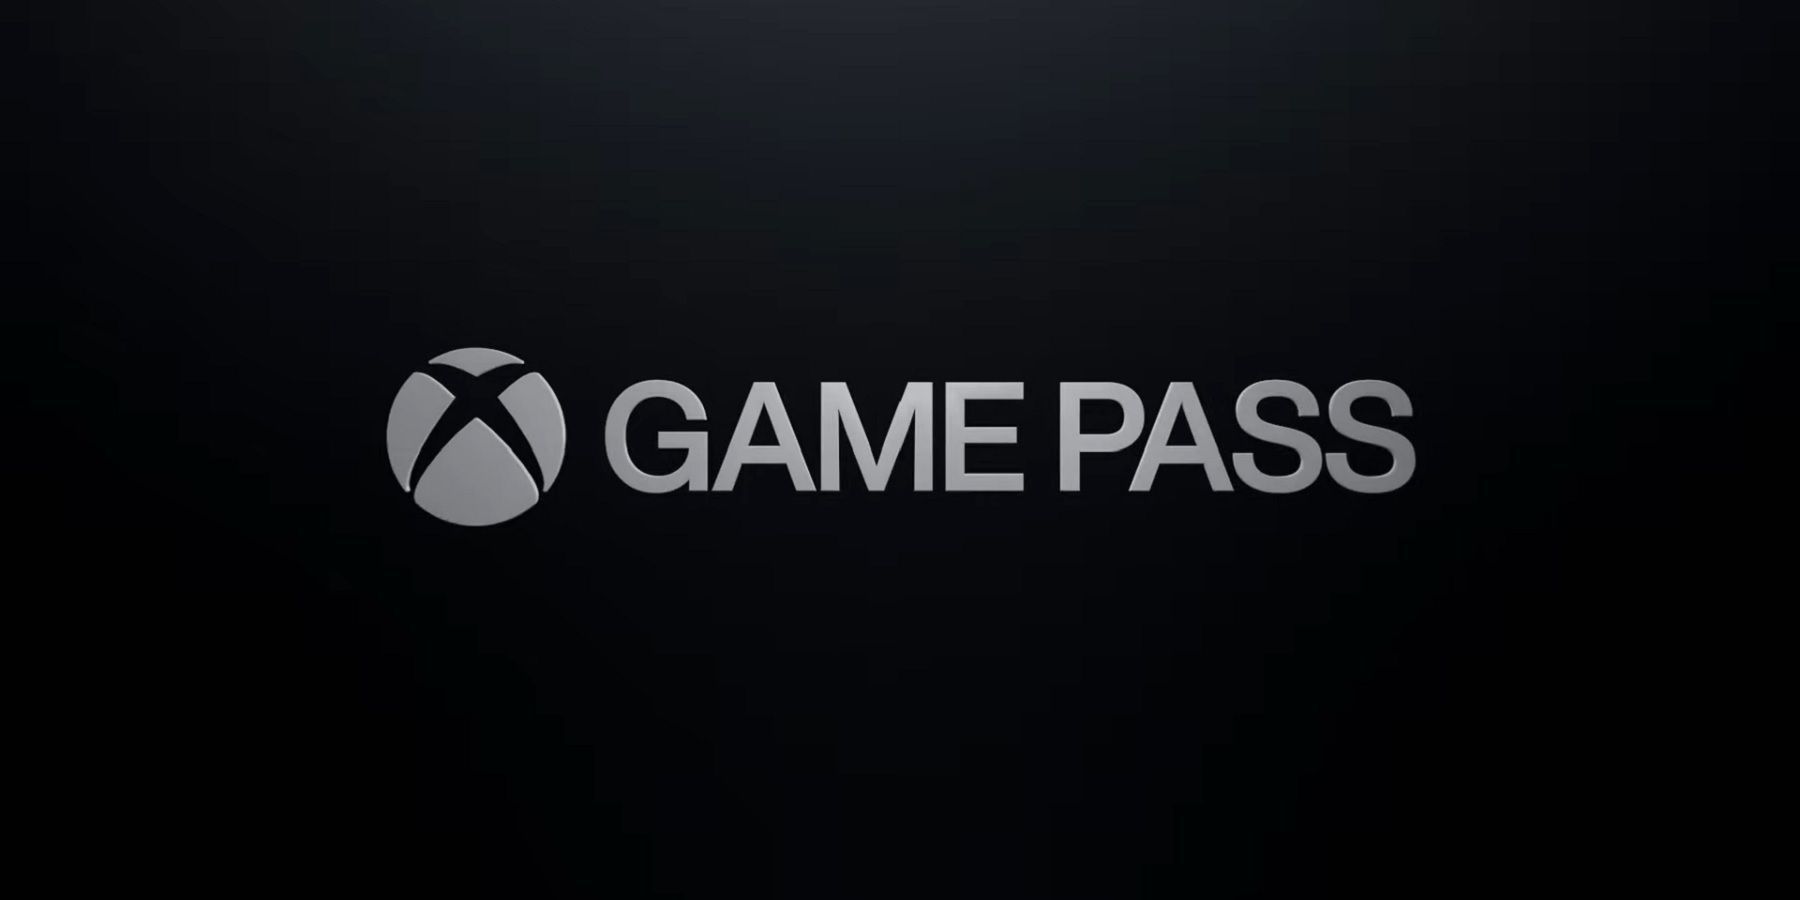 Xbox Game Pass Games Leaving in May 2022 Include Final Fantasy X